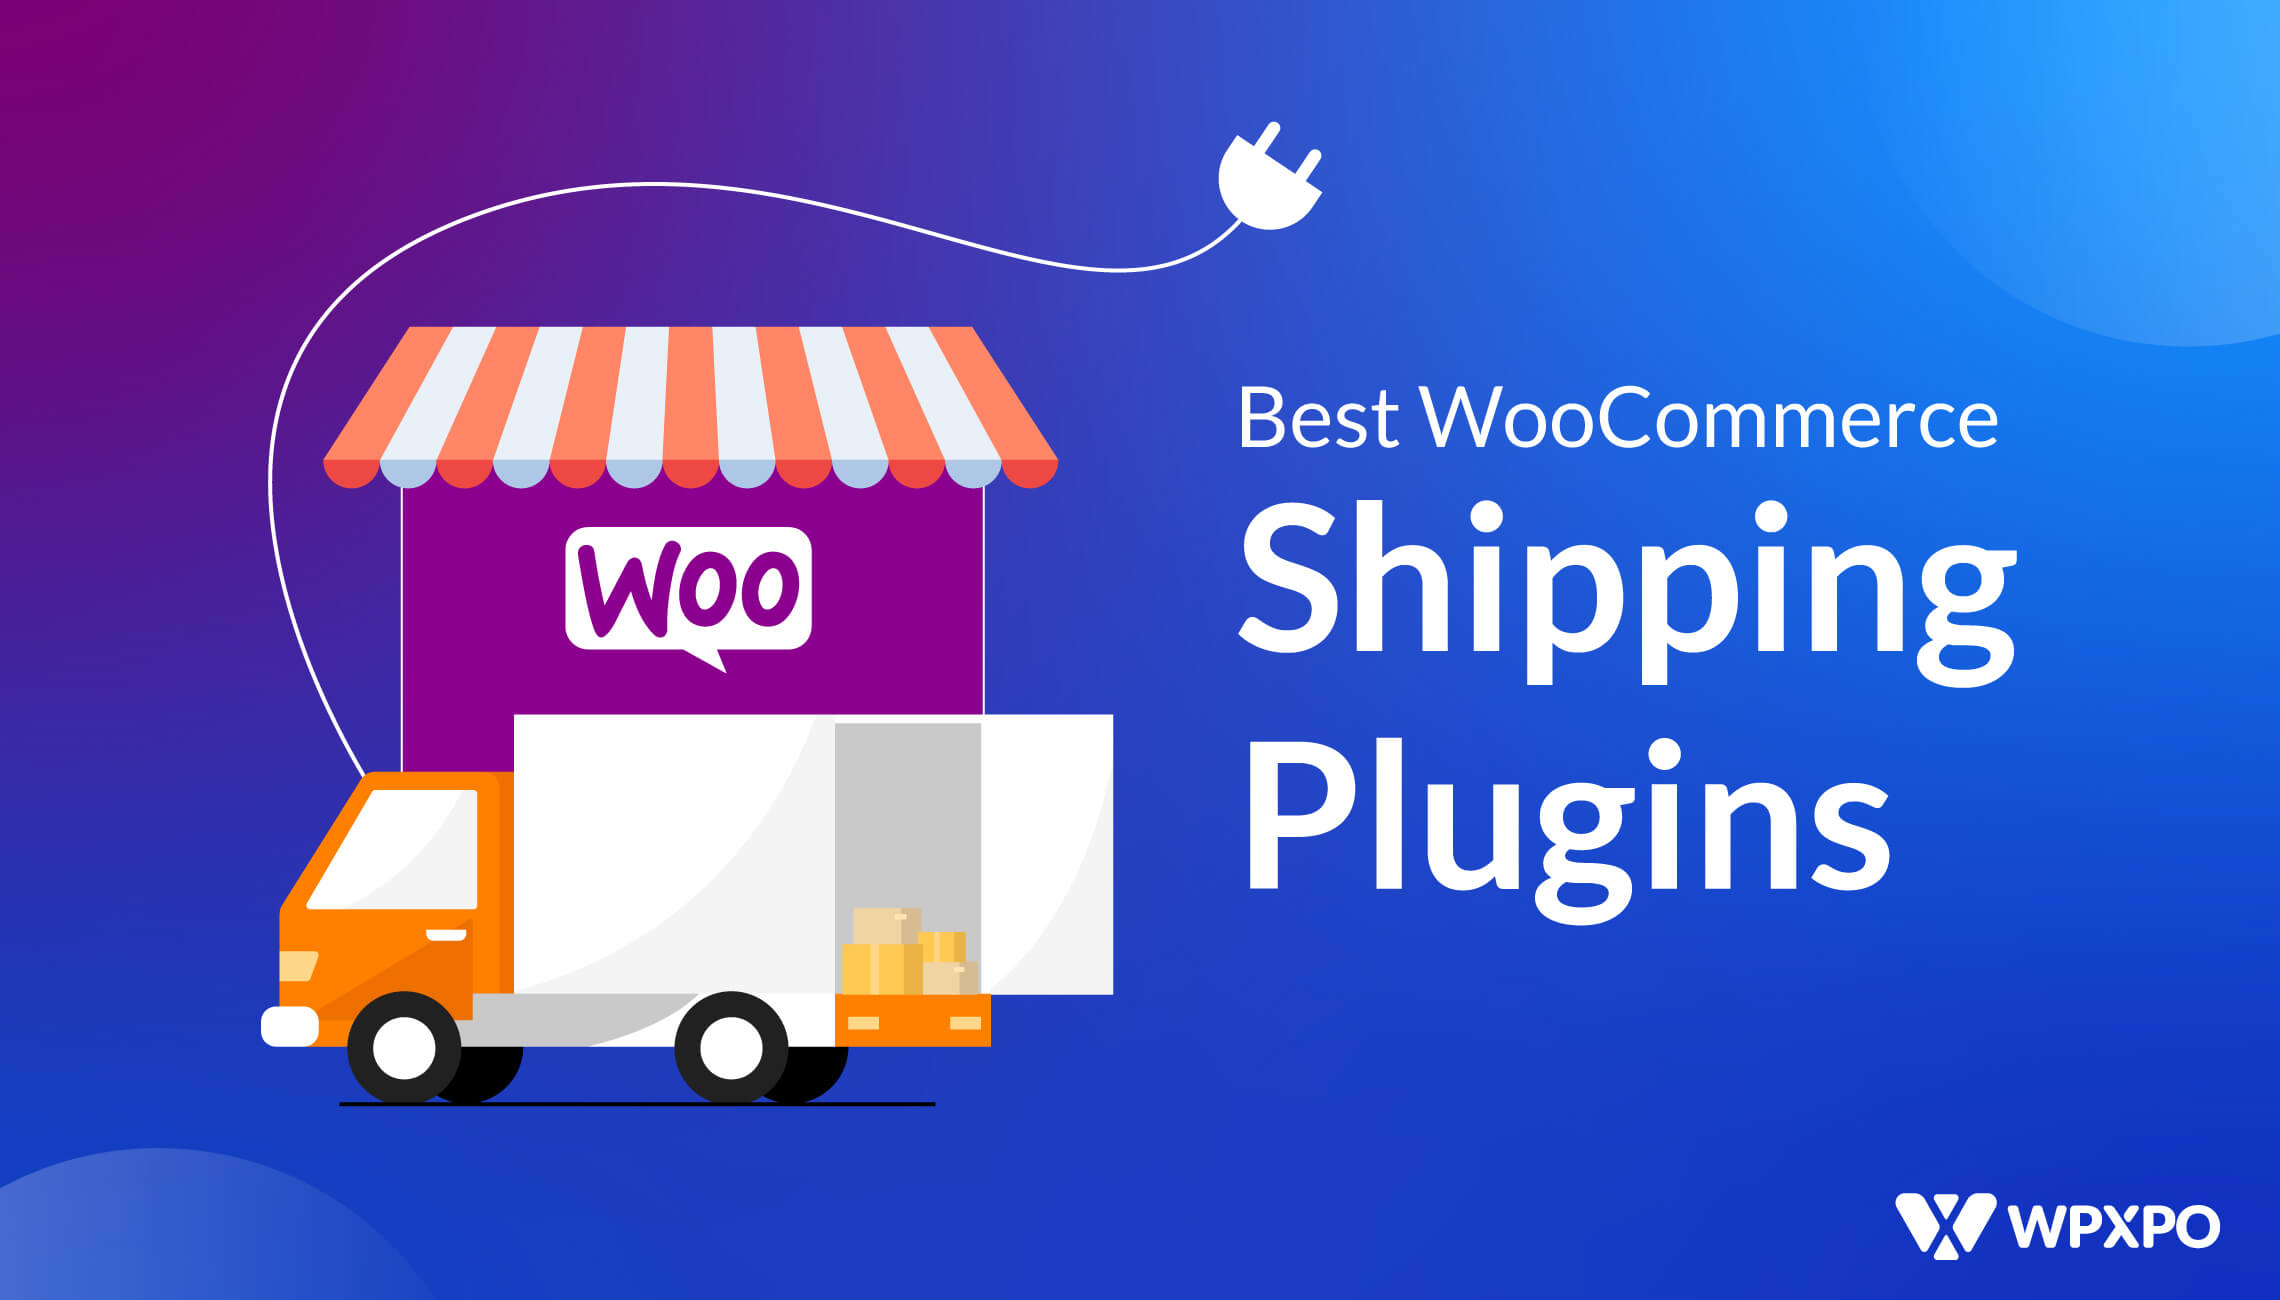 Best WooCommerce Shipping Plugins